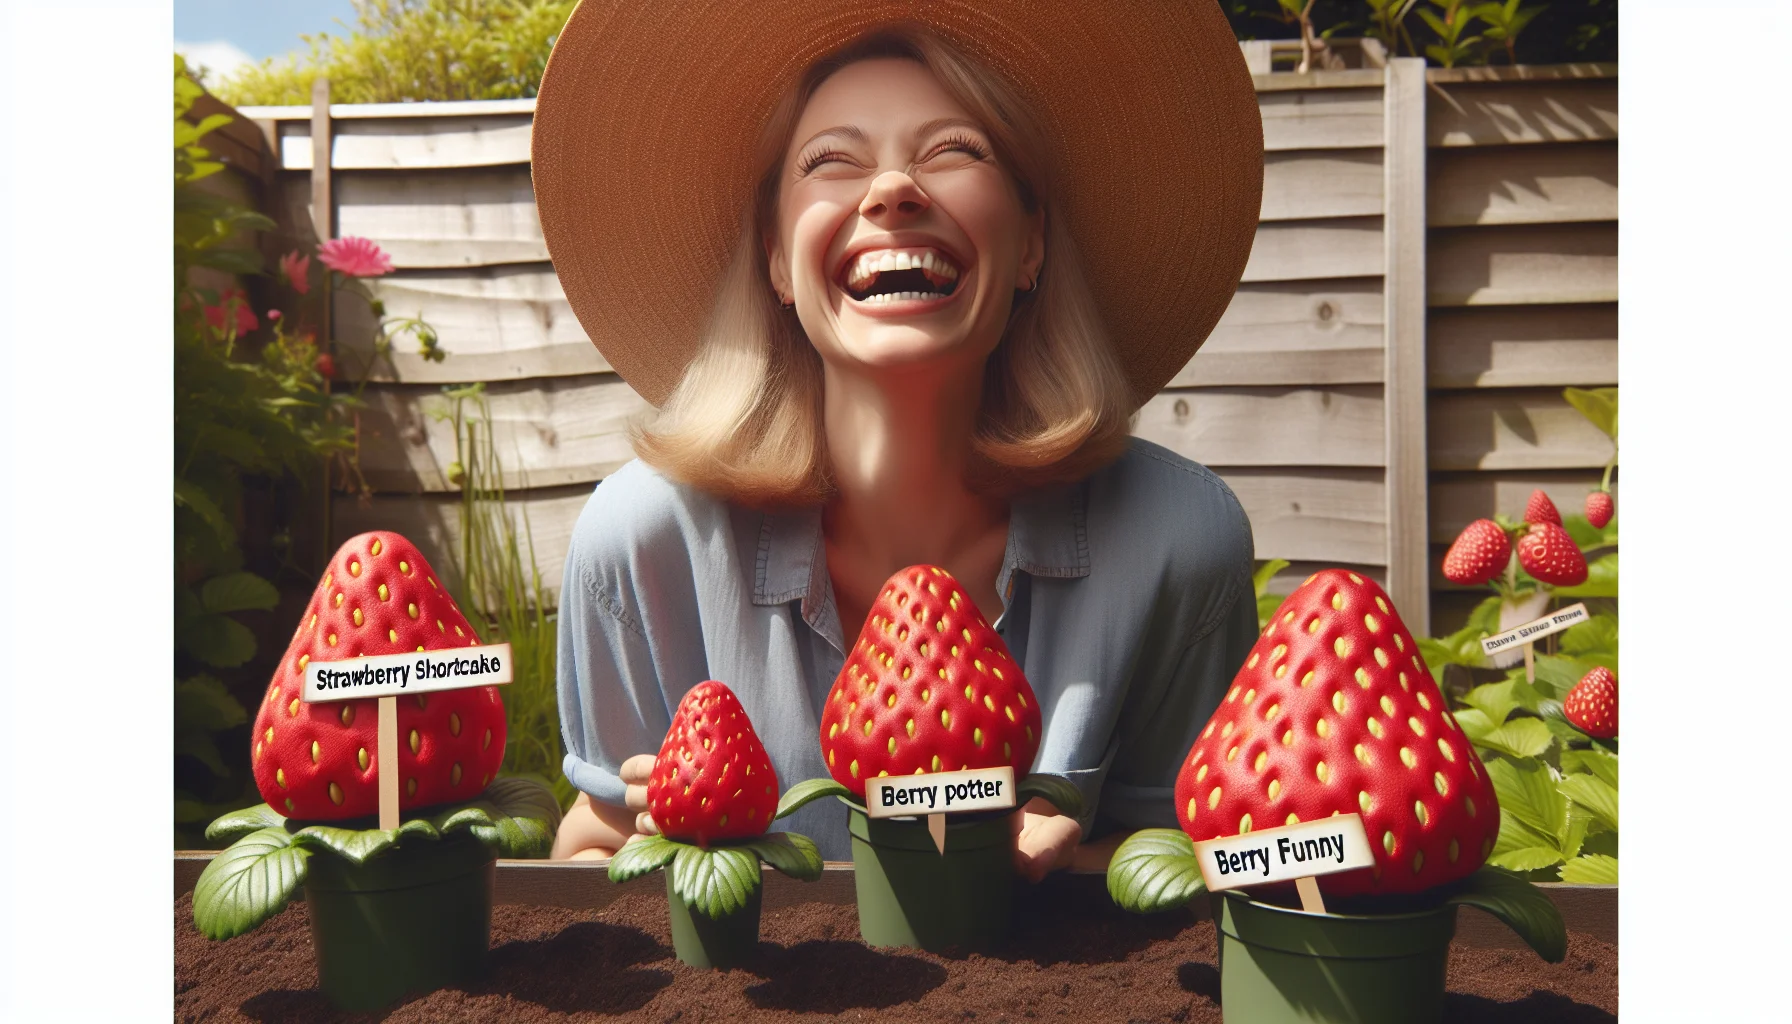 Imagine a humorous outdoor gardening scene. A Caucasian female gardener with a large straw hat is laughing while she observes giant strawberries in her garden. Each strawberry has a unique name tag attached to it like 'Strawberry shortcake', 'Berry Potter', and 'Berry Funny'. The scene is sunny, promoting a warm and inviting atmosphere, making the viewer feel the joy of gardening and the thrill of growing their own produce.